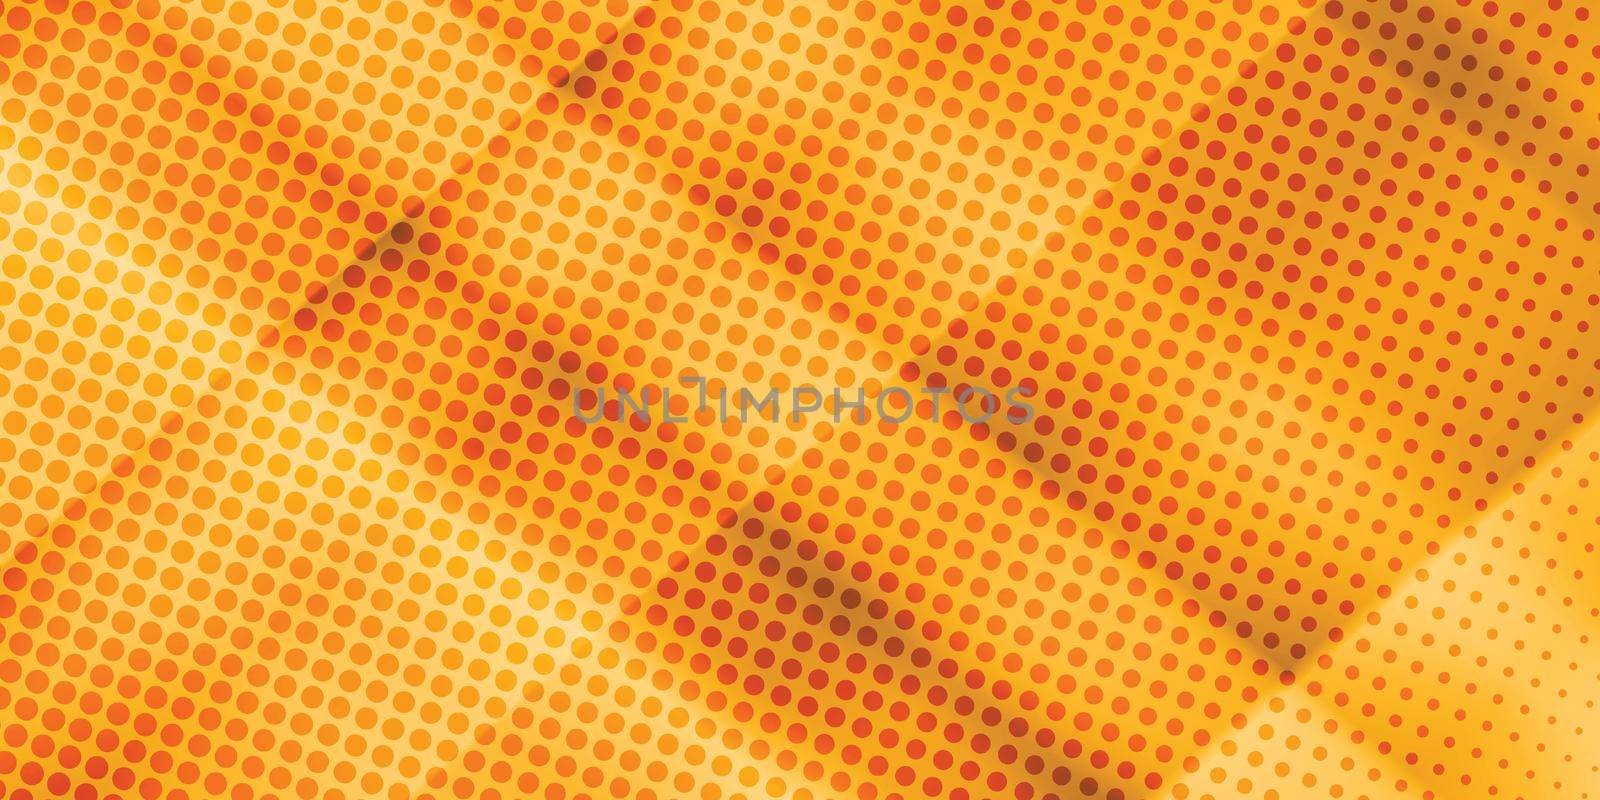 90-s style. Creative illustration in halftone style with orange gradient. Abstract colorful geometric background. Pattern for wallpaper, web page, textures.